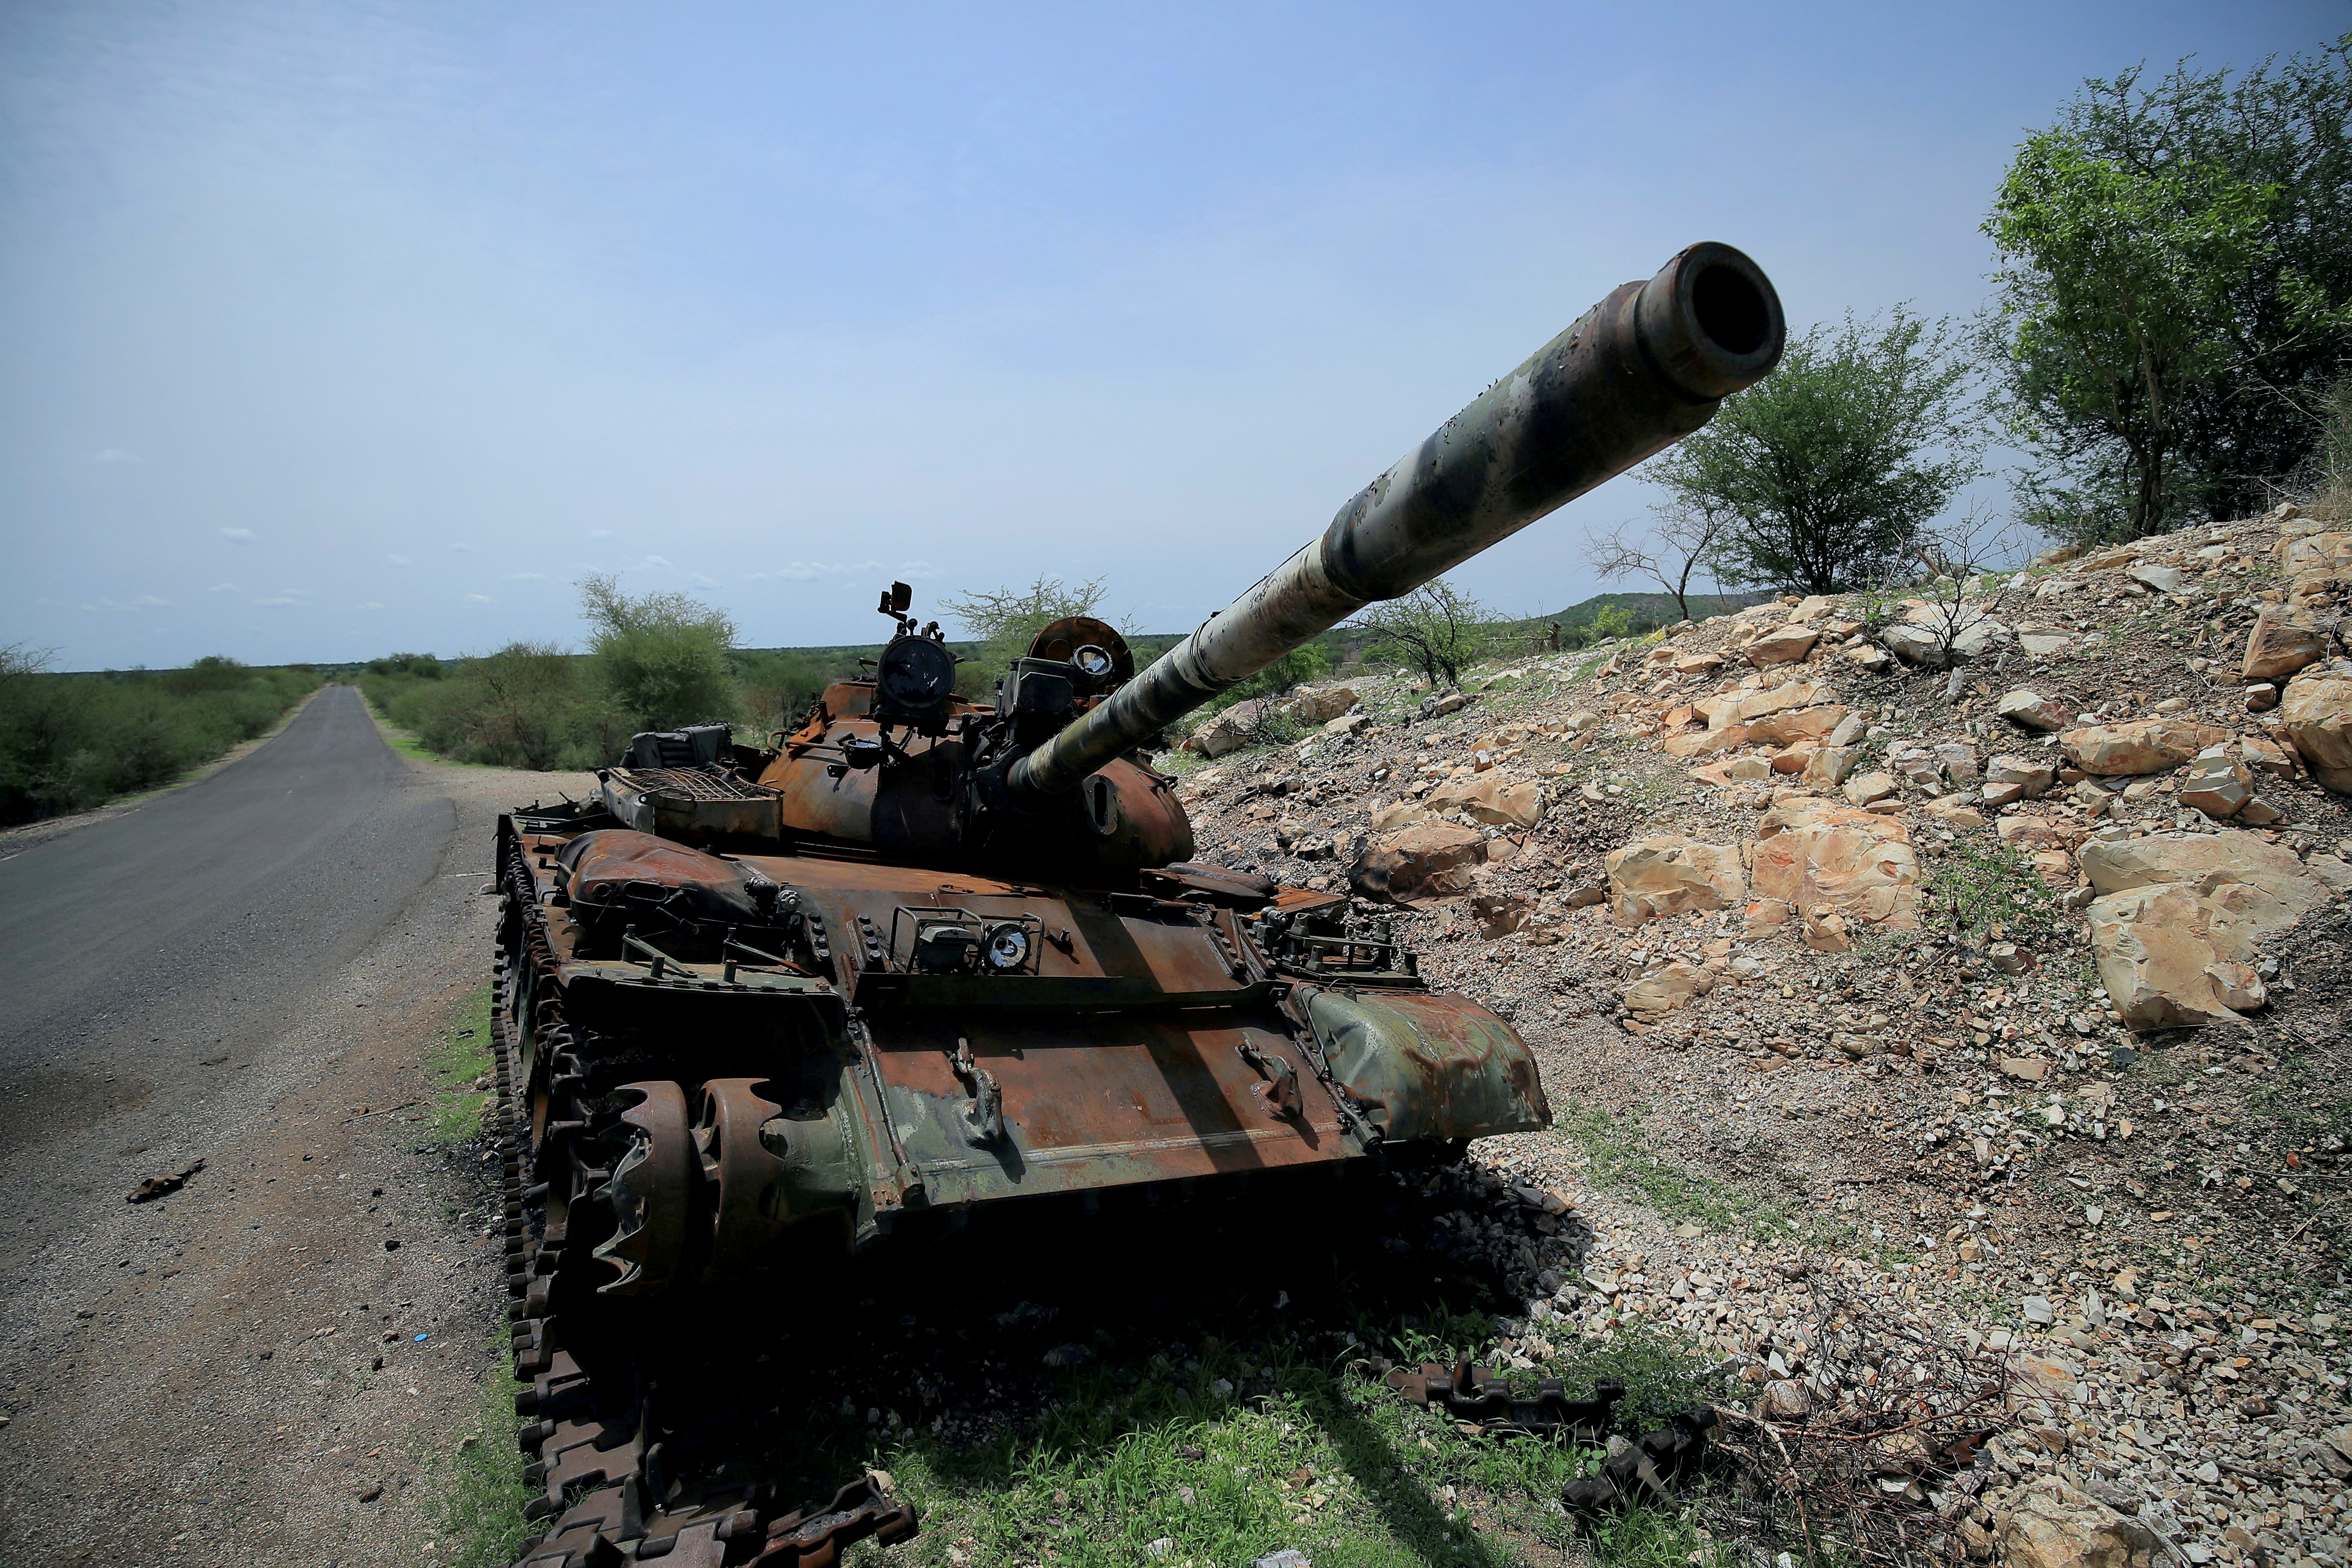 A tank damaged during the fighting between Ethiopia's National Defense Force (ENDF) and Tigray Special Forces stands on the outskirts of Humera town in Ethiopia July 1, 2021.  REUTERS/Stringer/File Photo